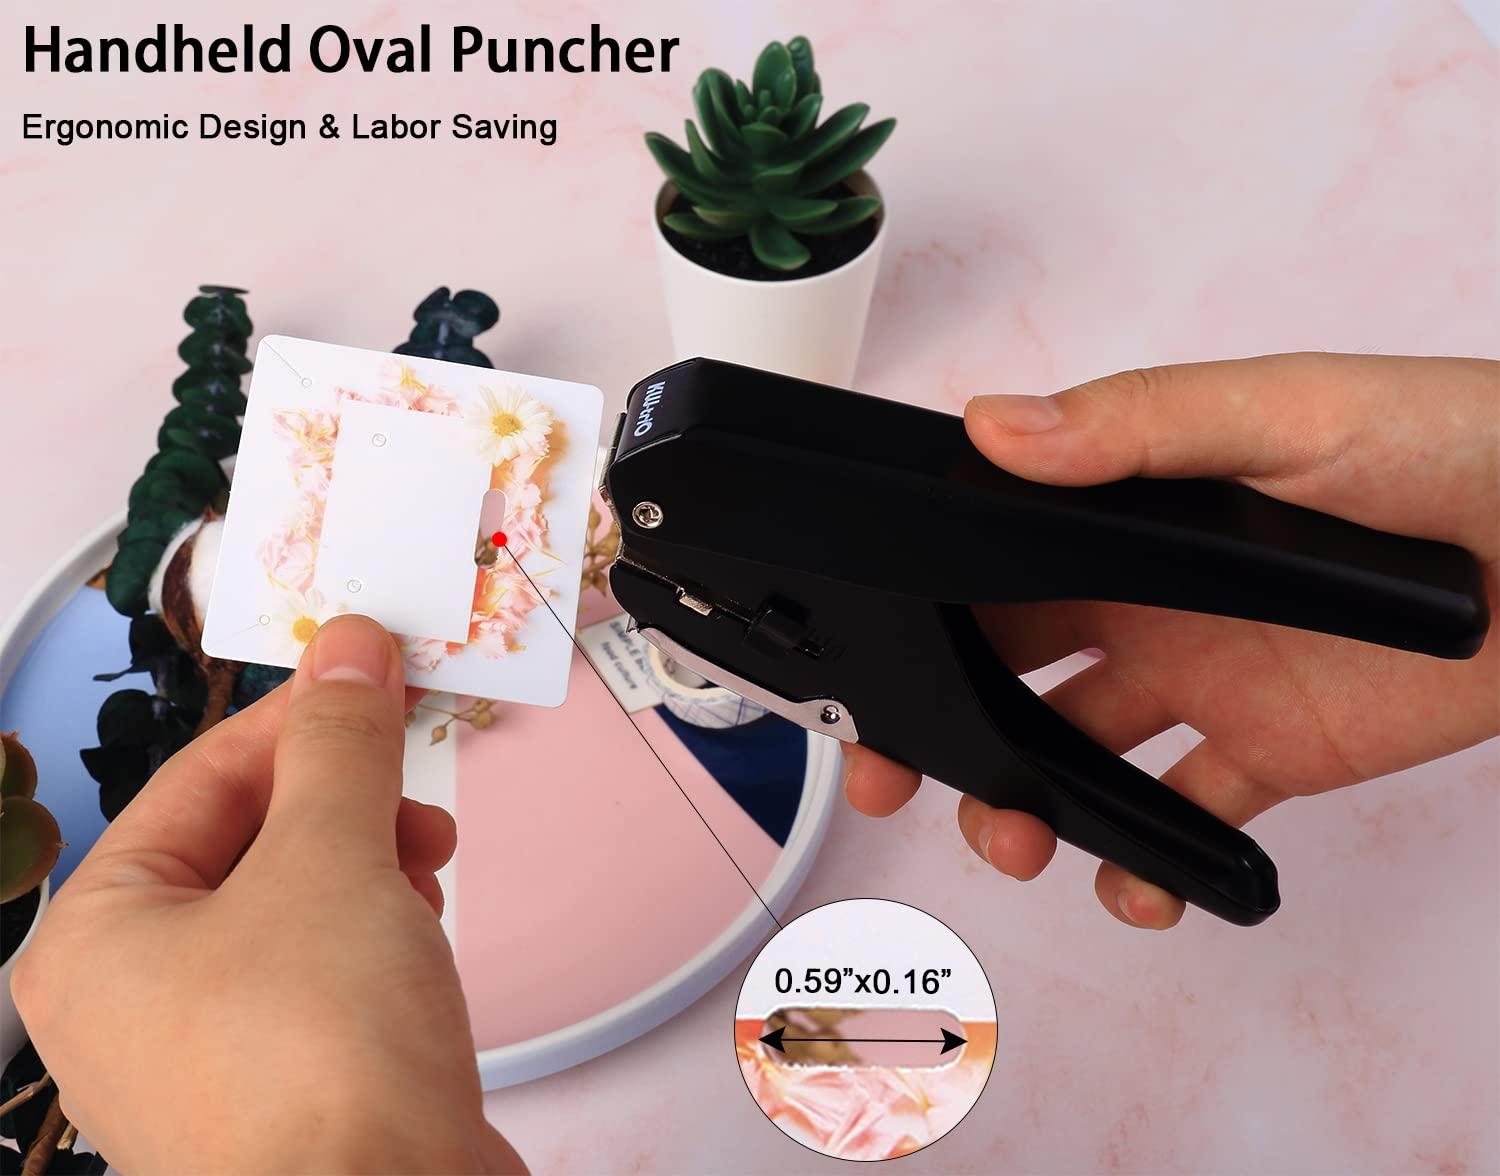 2-Hole Paper Punch Handheld Metal Hole Puncher Adjustable Hole